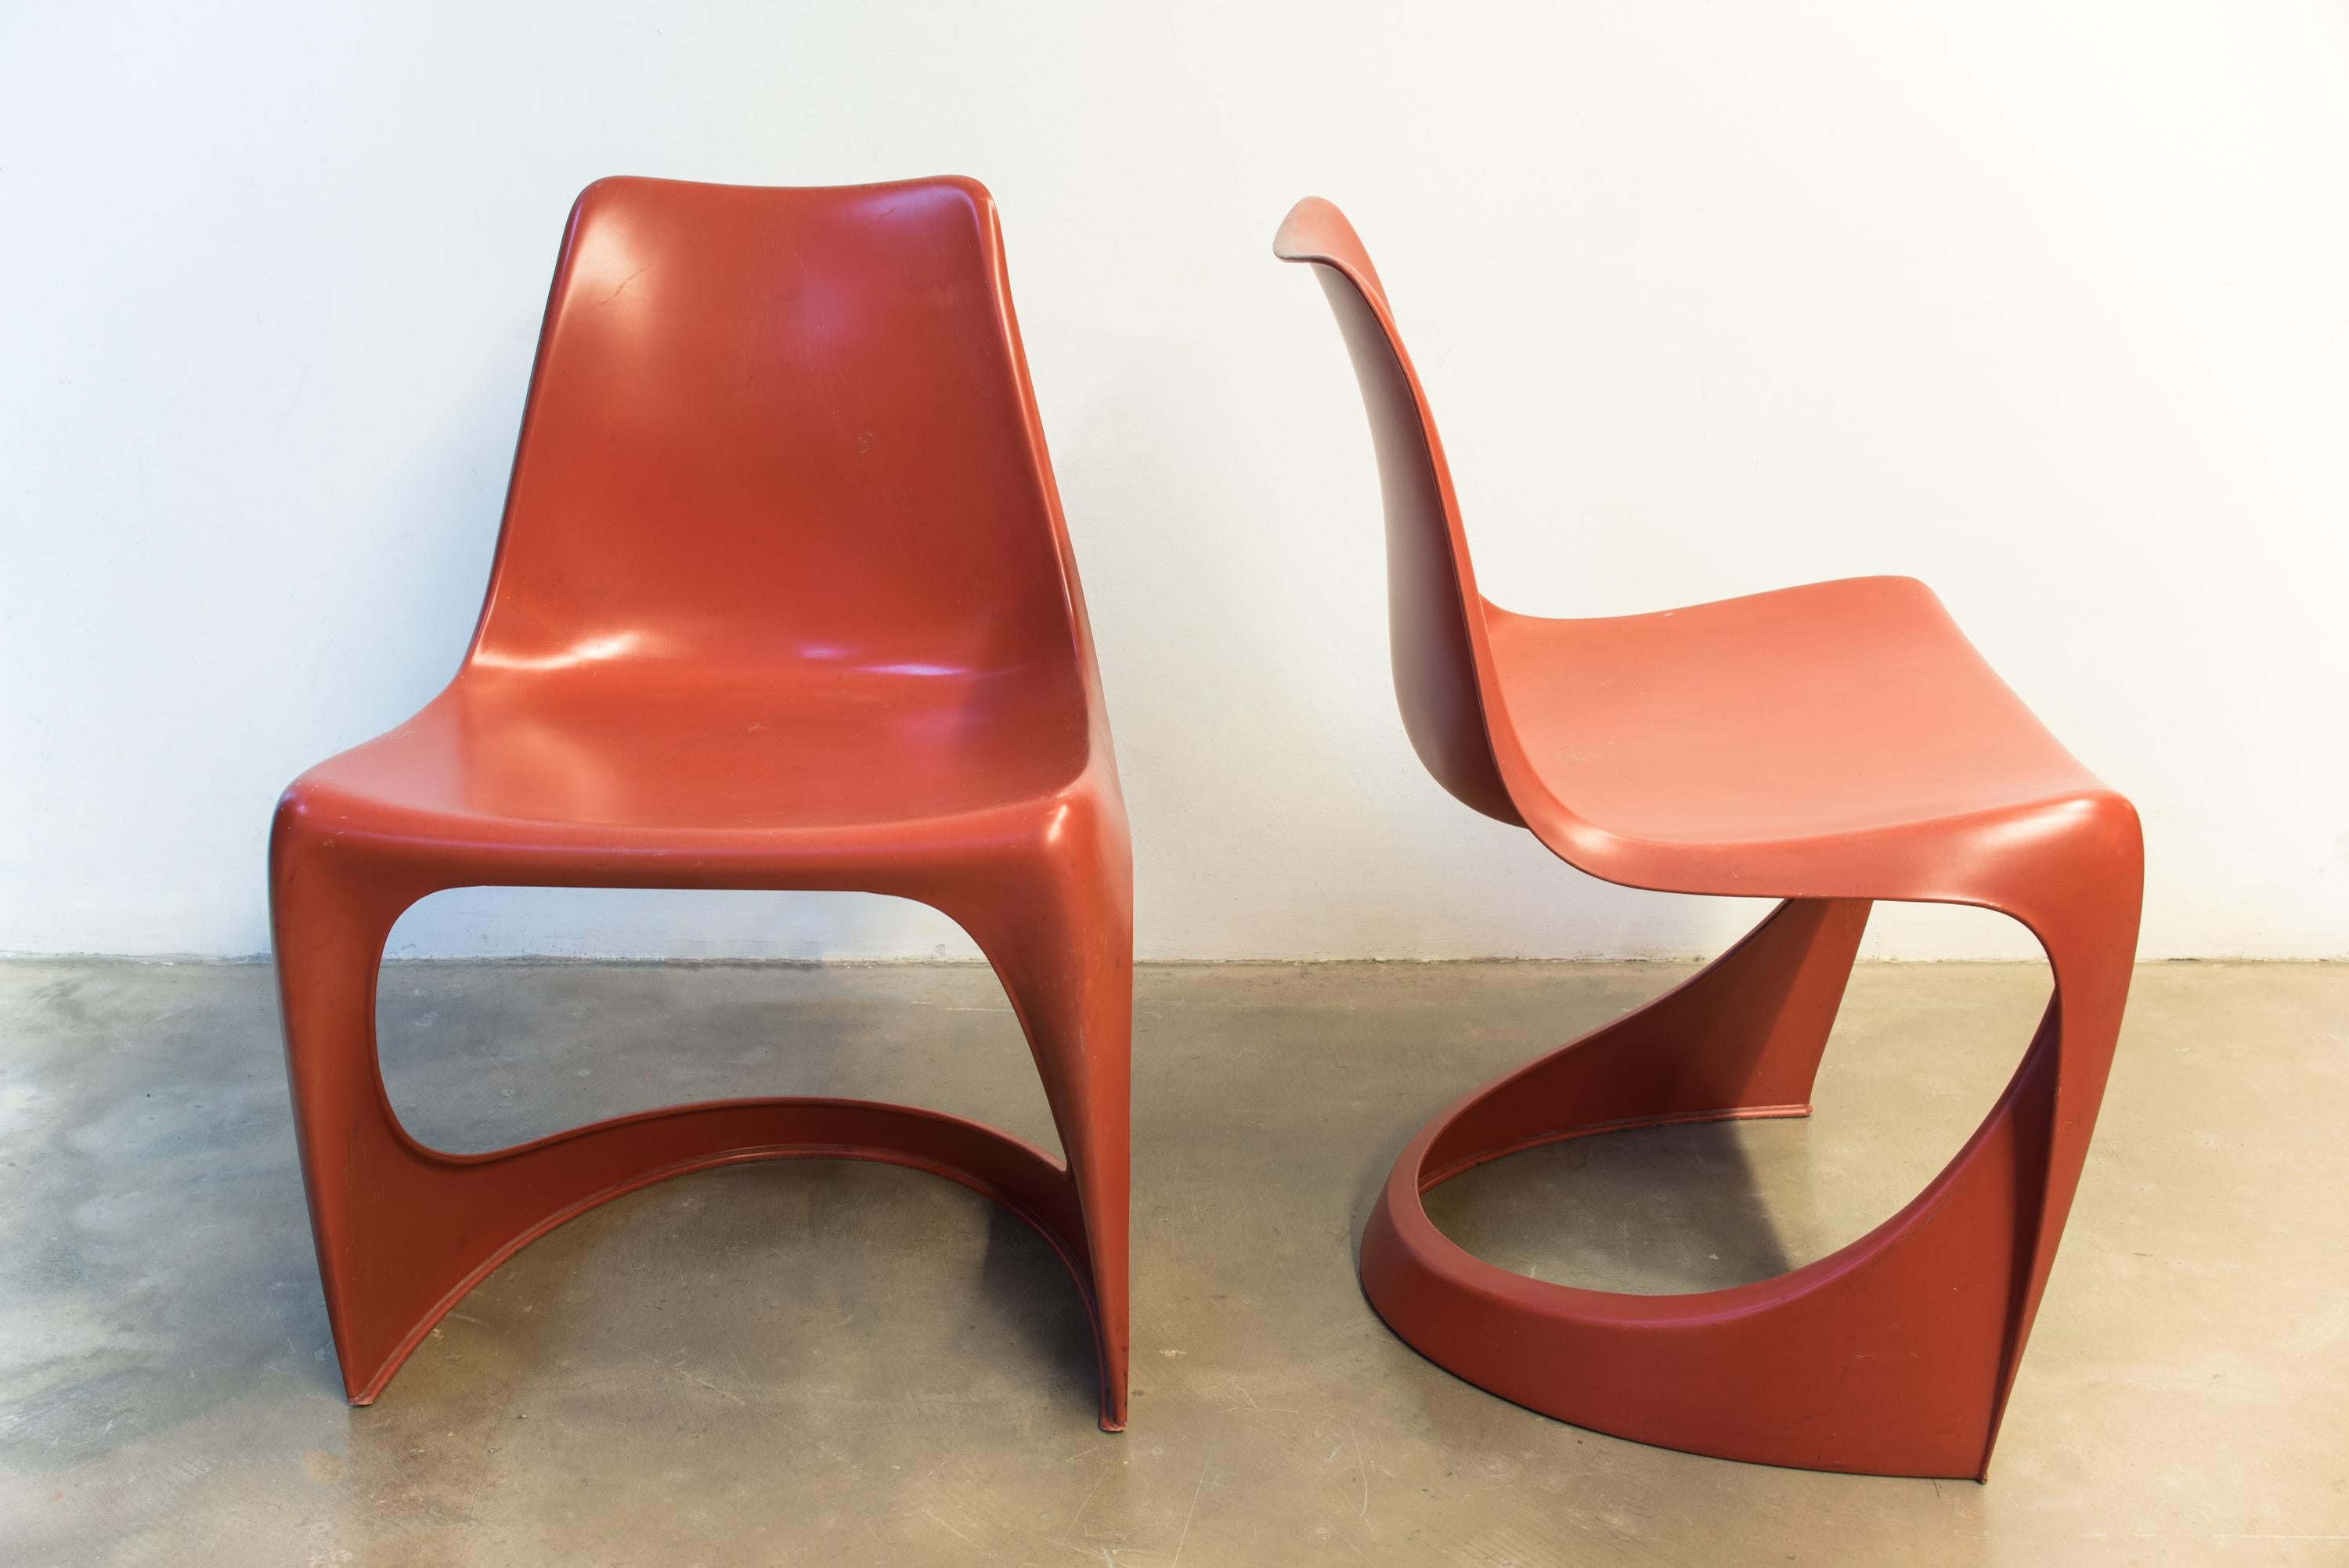 Red plastic chairs by Steen Ostergaard by Cado, model 290, Denmark, 1968.
Indoor/Outdoor stacking dining chairs.